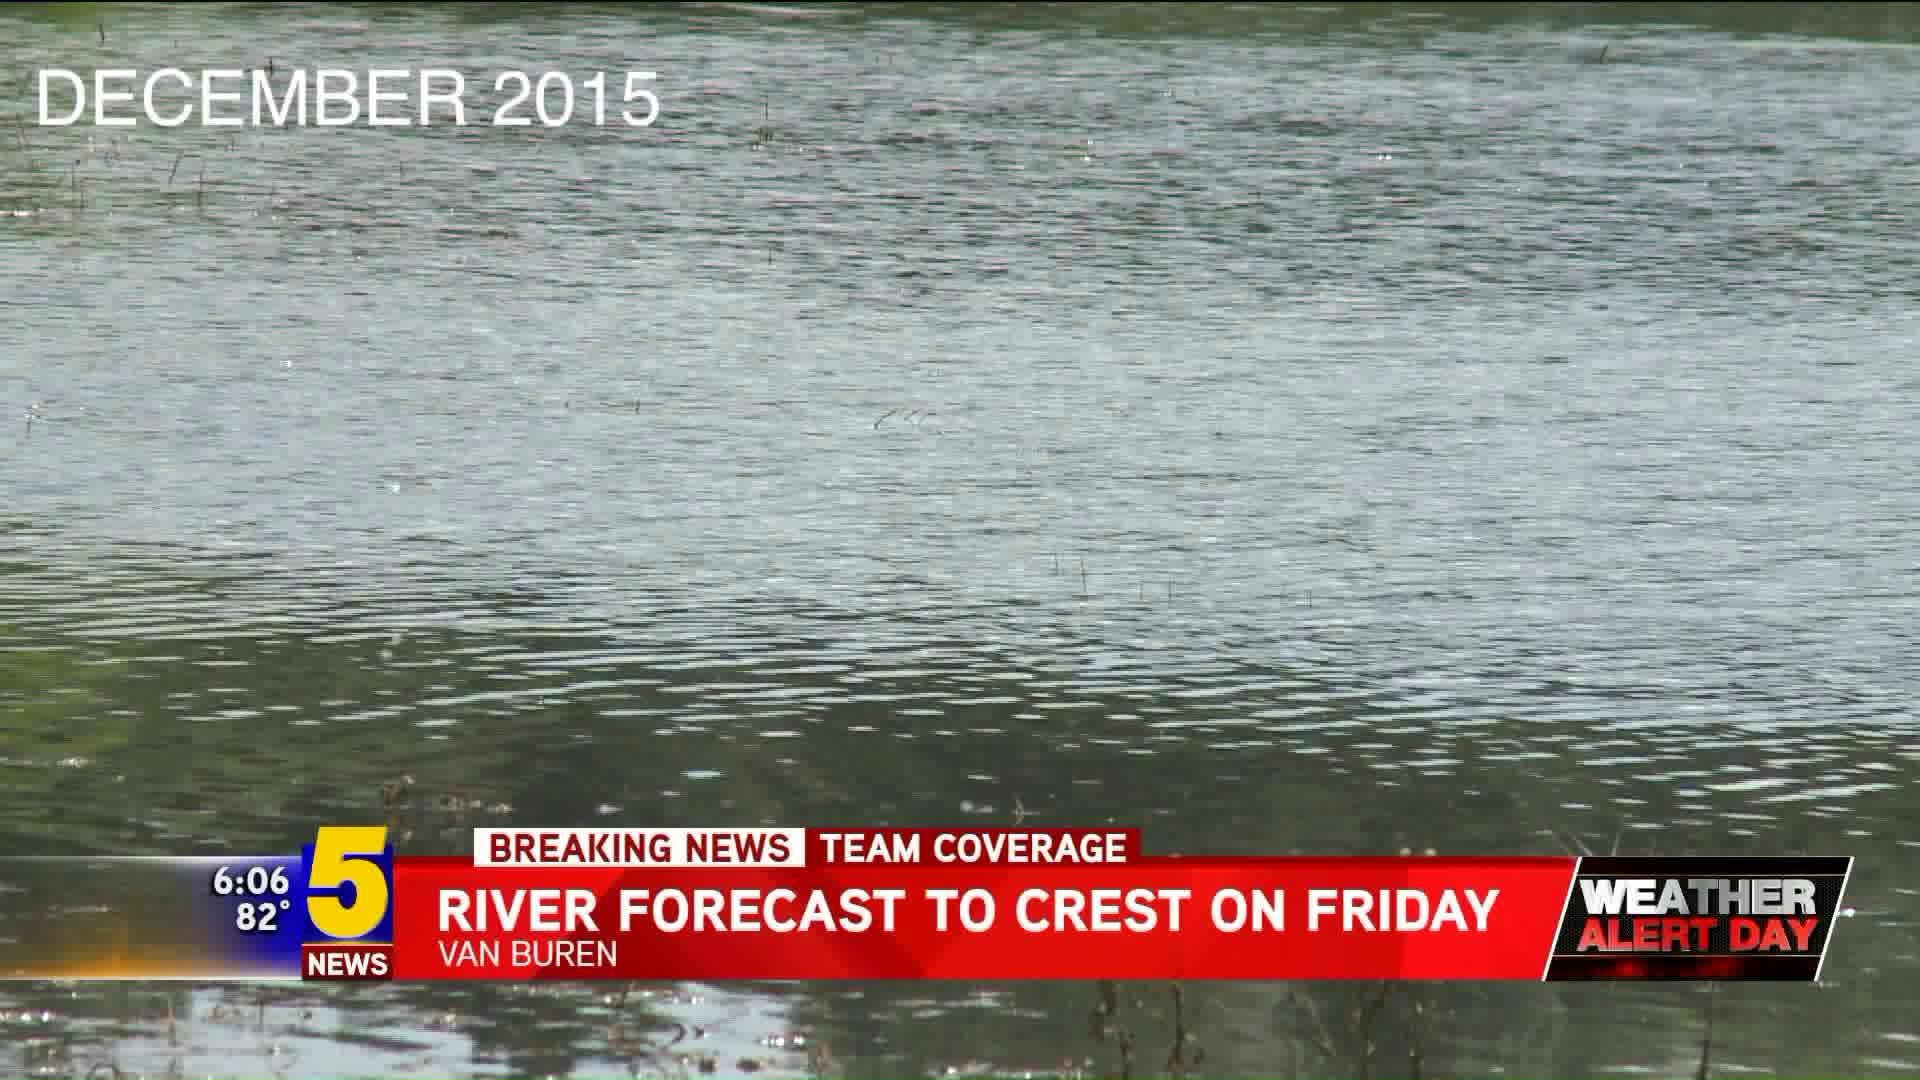 River Forecast to Crest on Friday